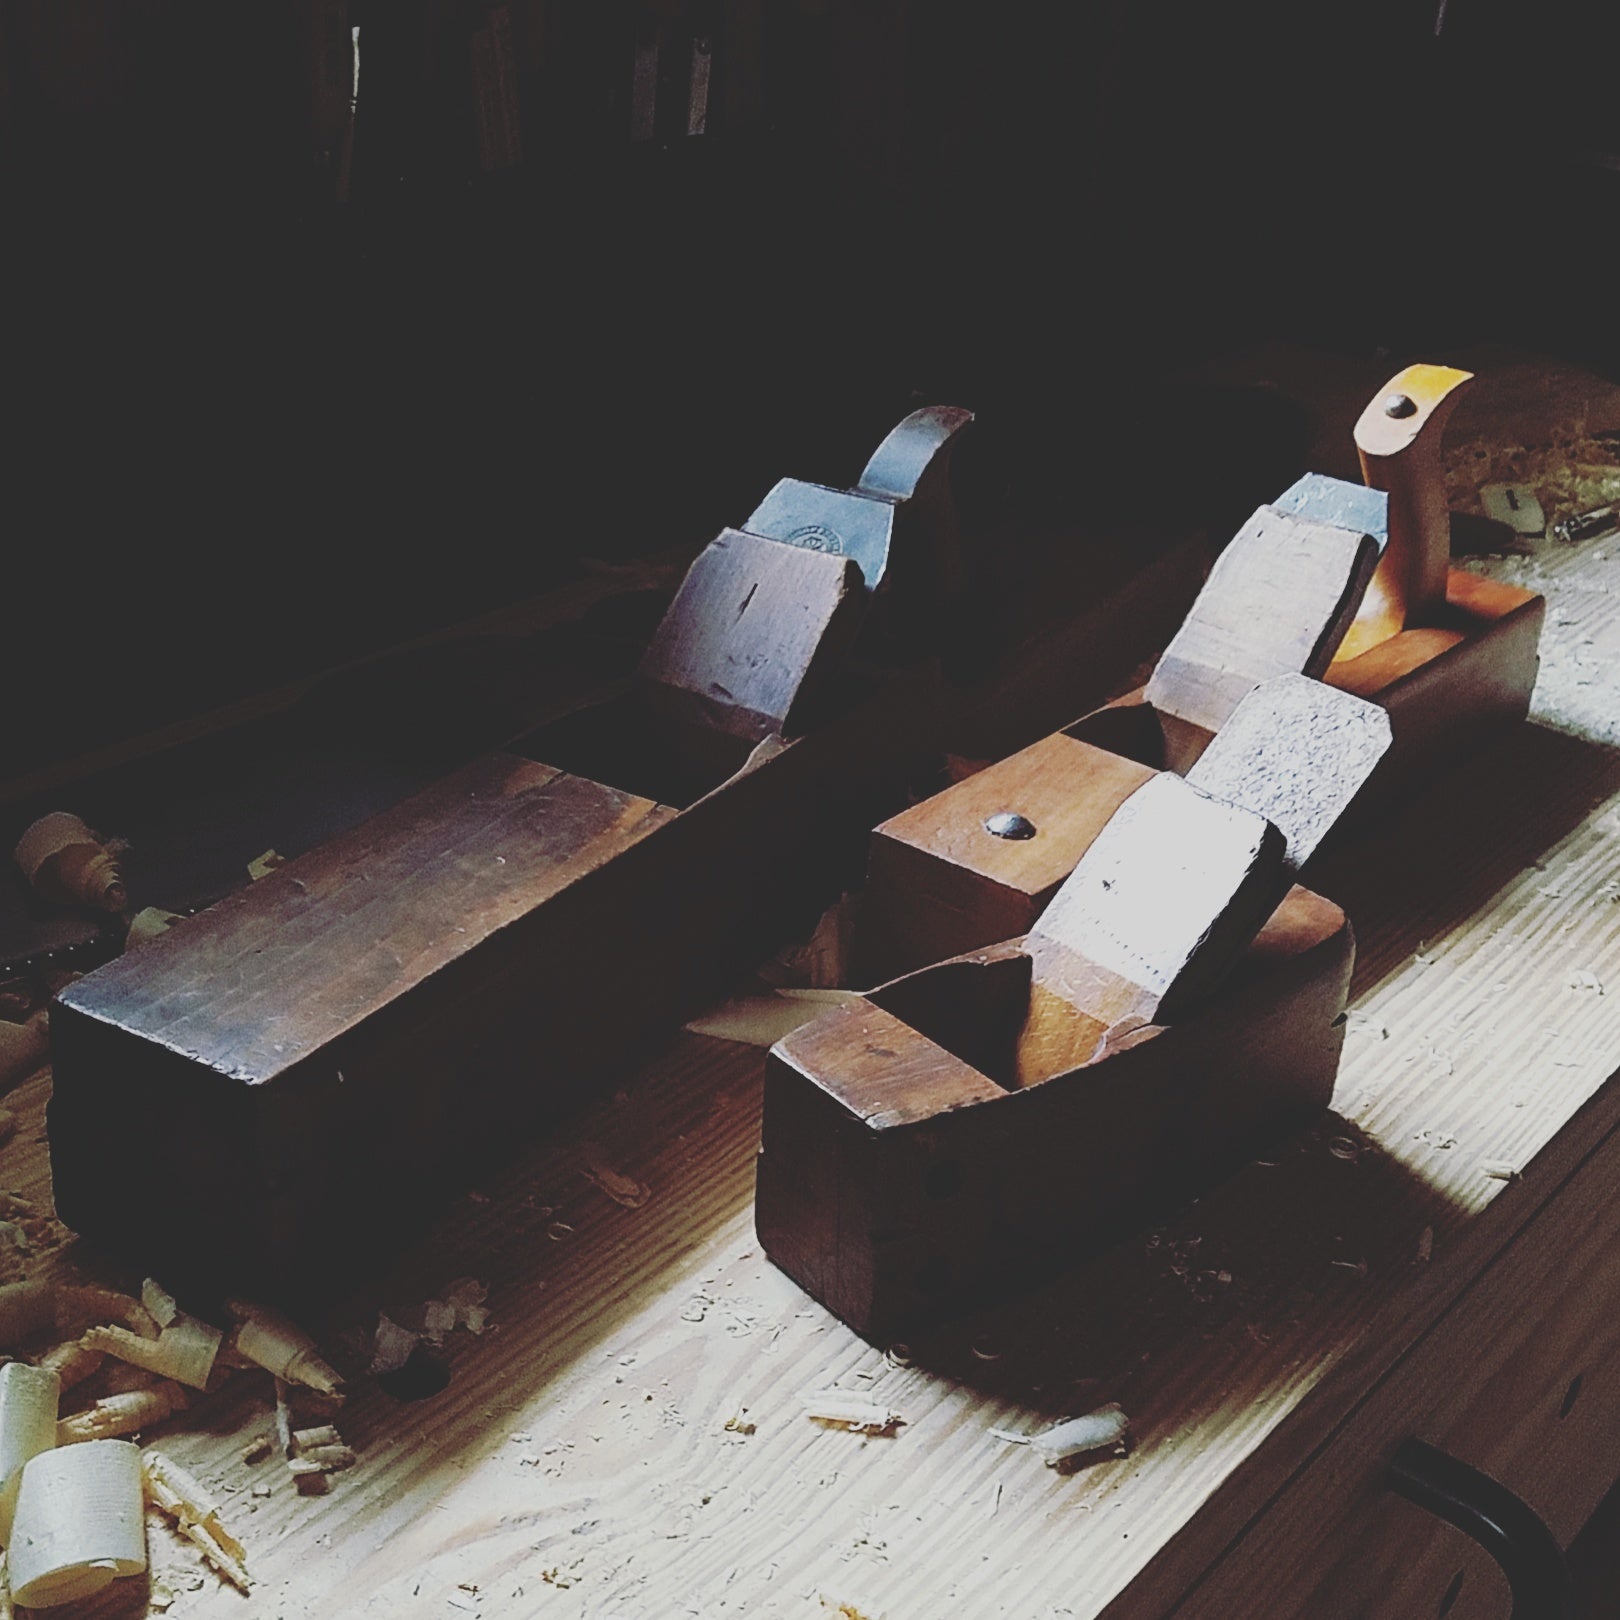 Using Wooden Planes - Old, But They've Still Got It